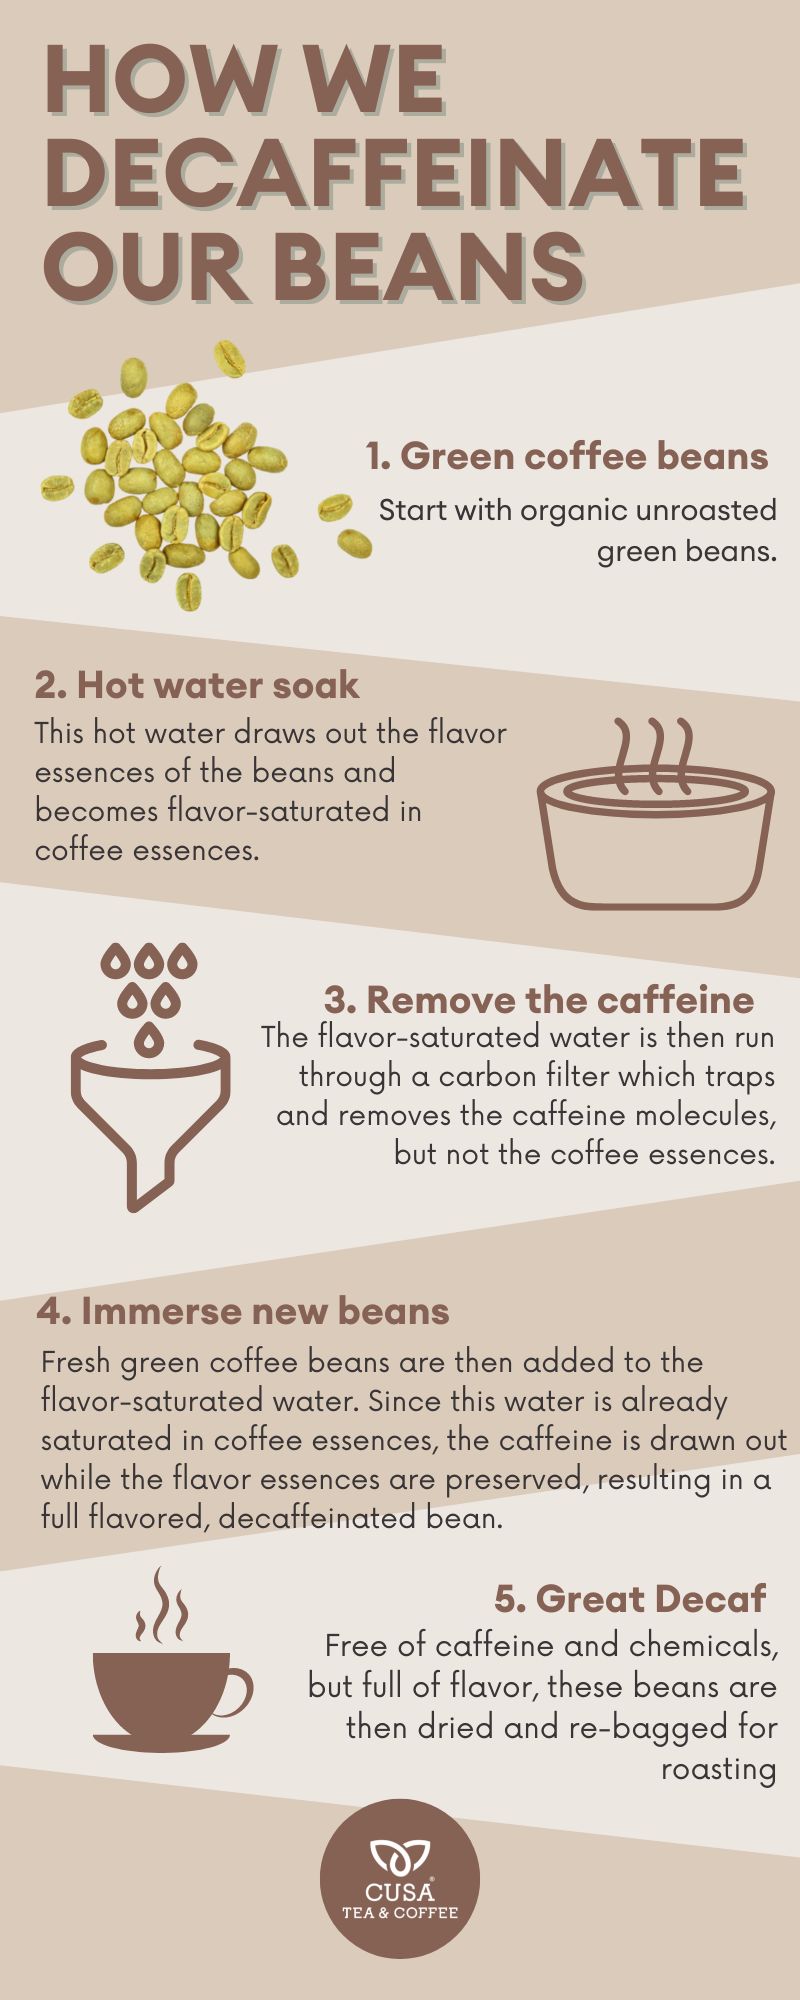 How we Decaffeinate our beans